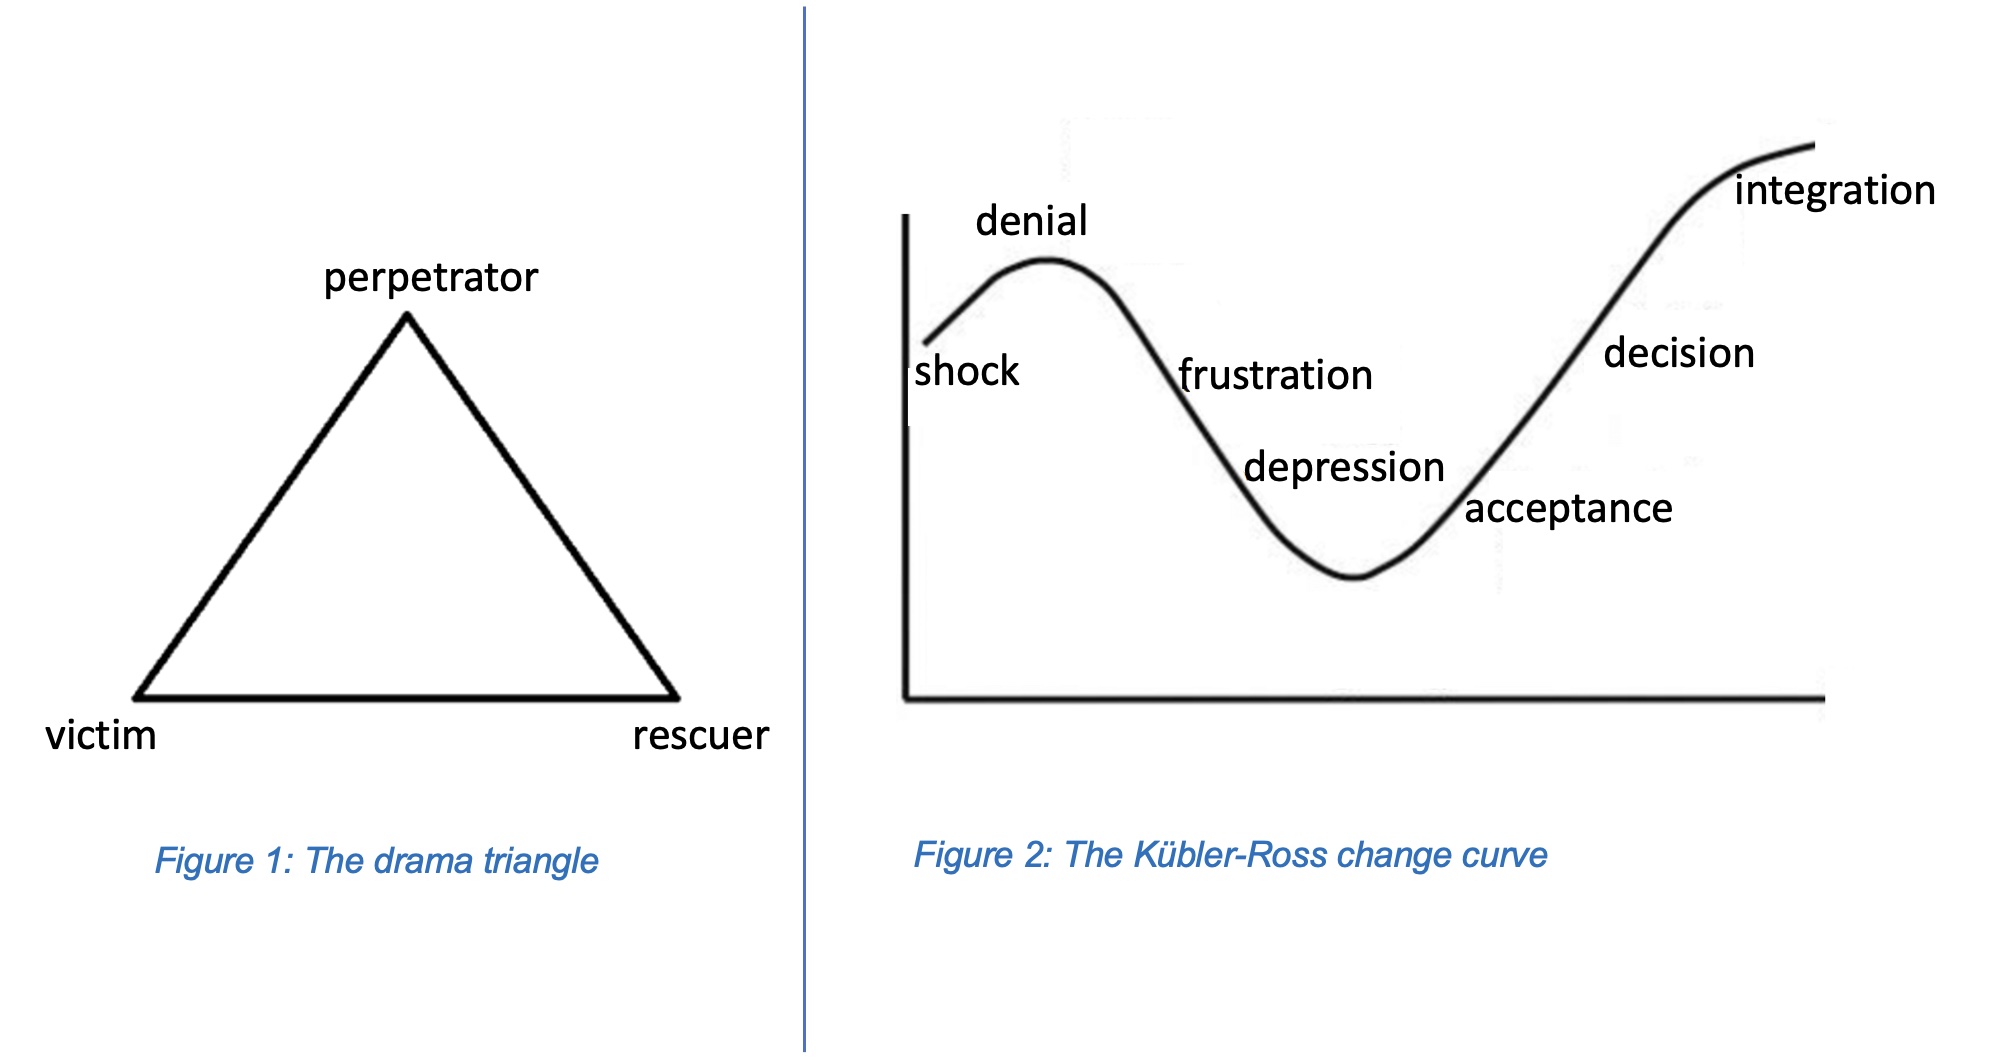 drama-triangle-and-kubler-ross-change-curve